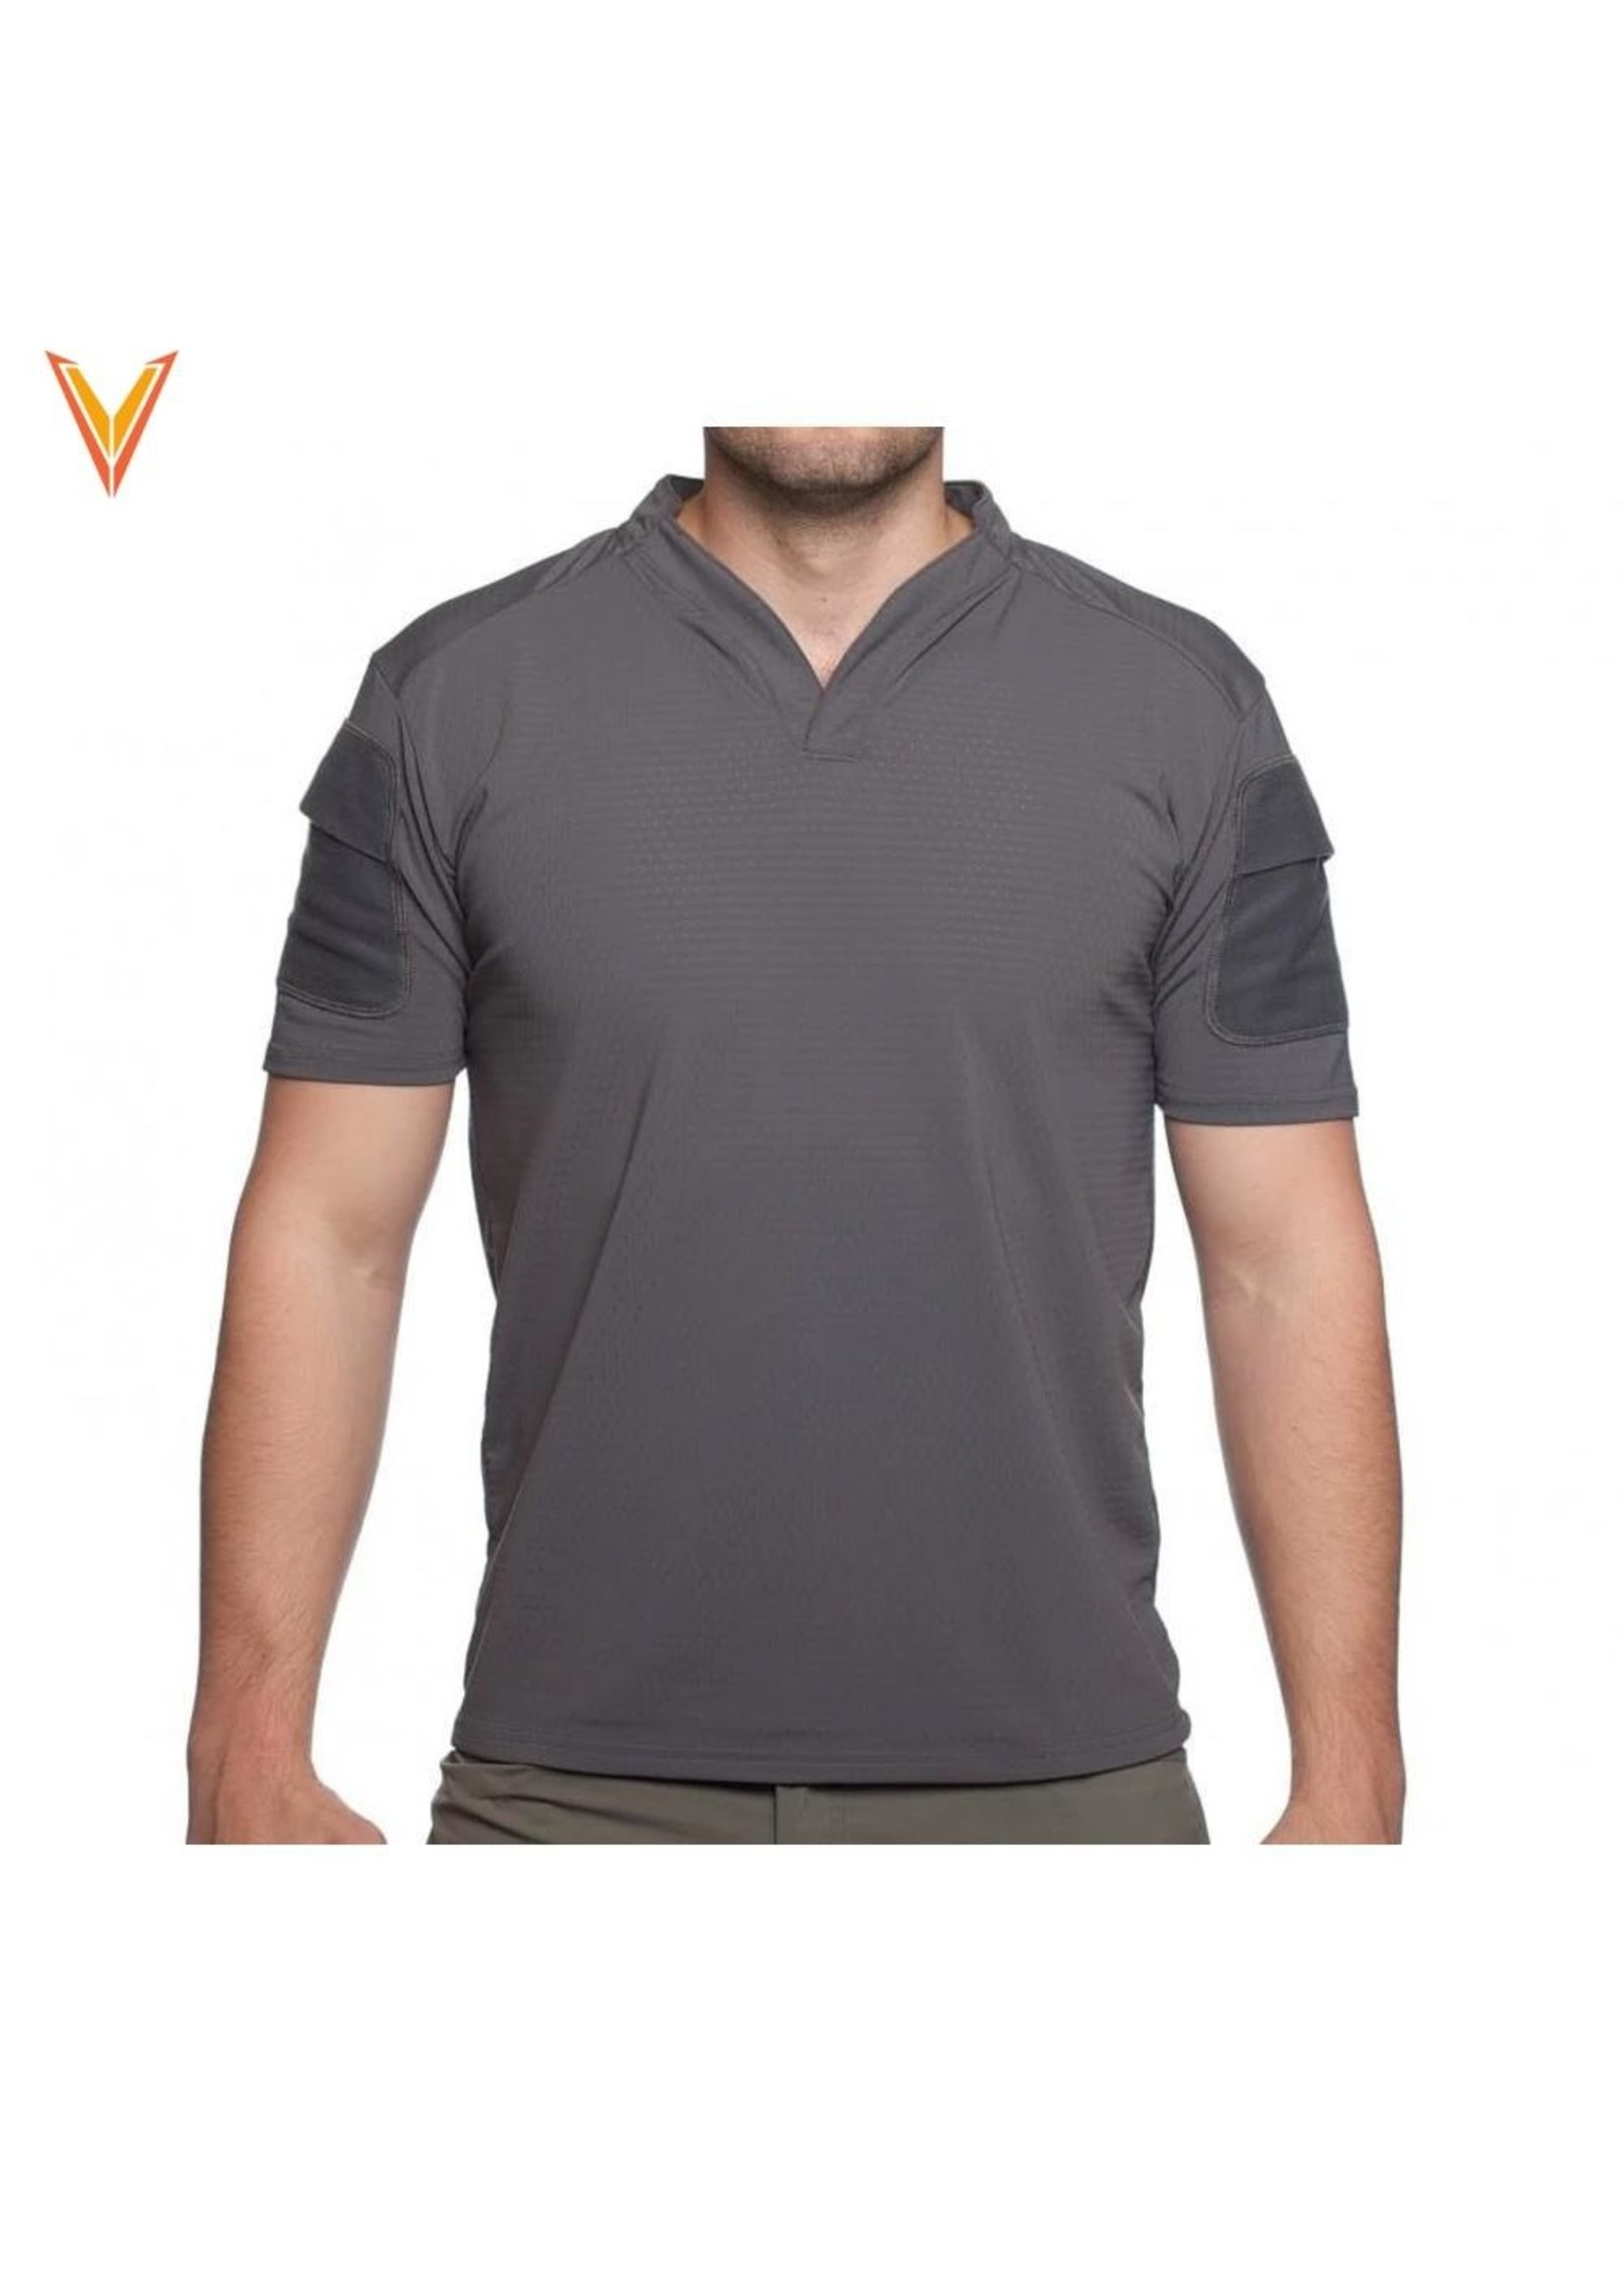 VELOCITY SYSTEMS BOSS RUGBY SHIRT